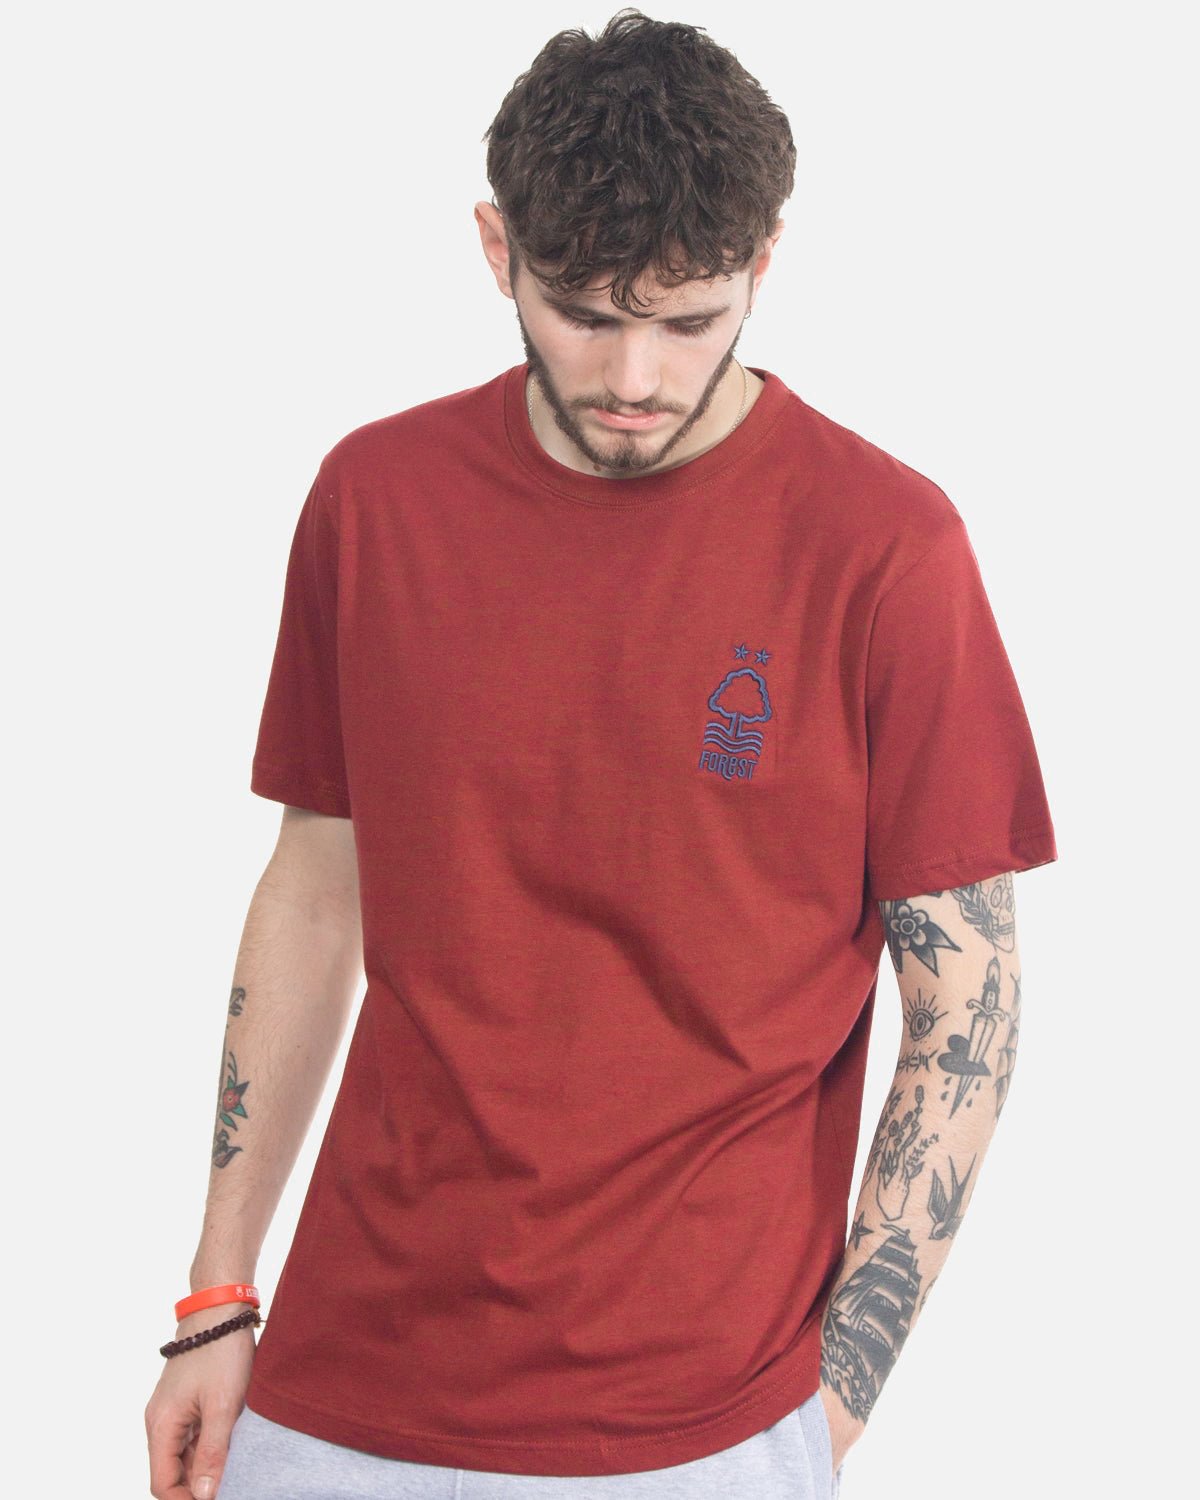 NFFC Red Essential T-Shirt - Nottingham Forest FC